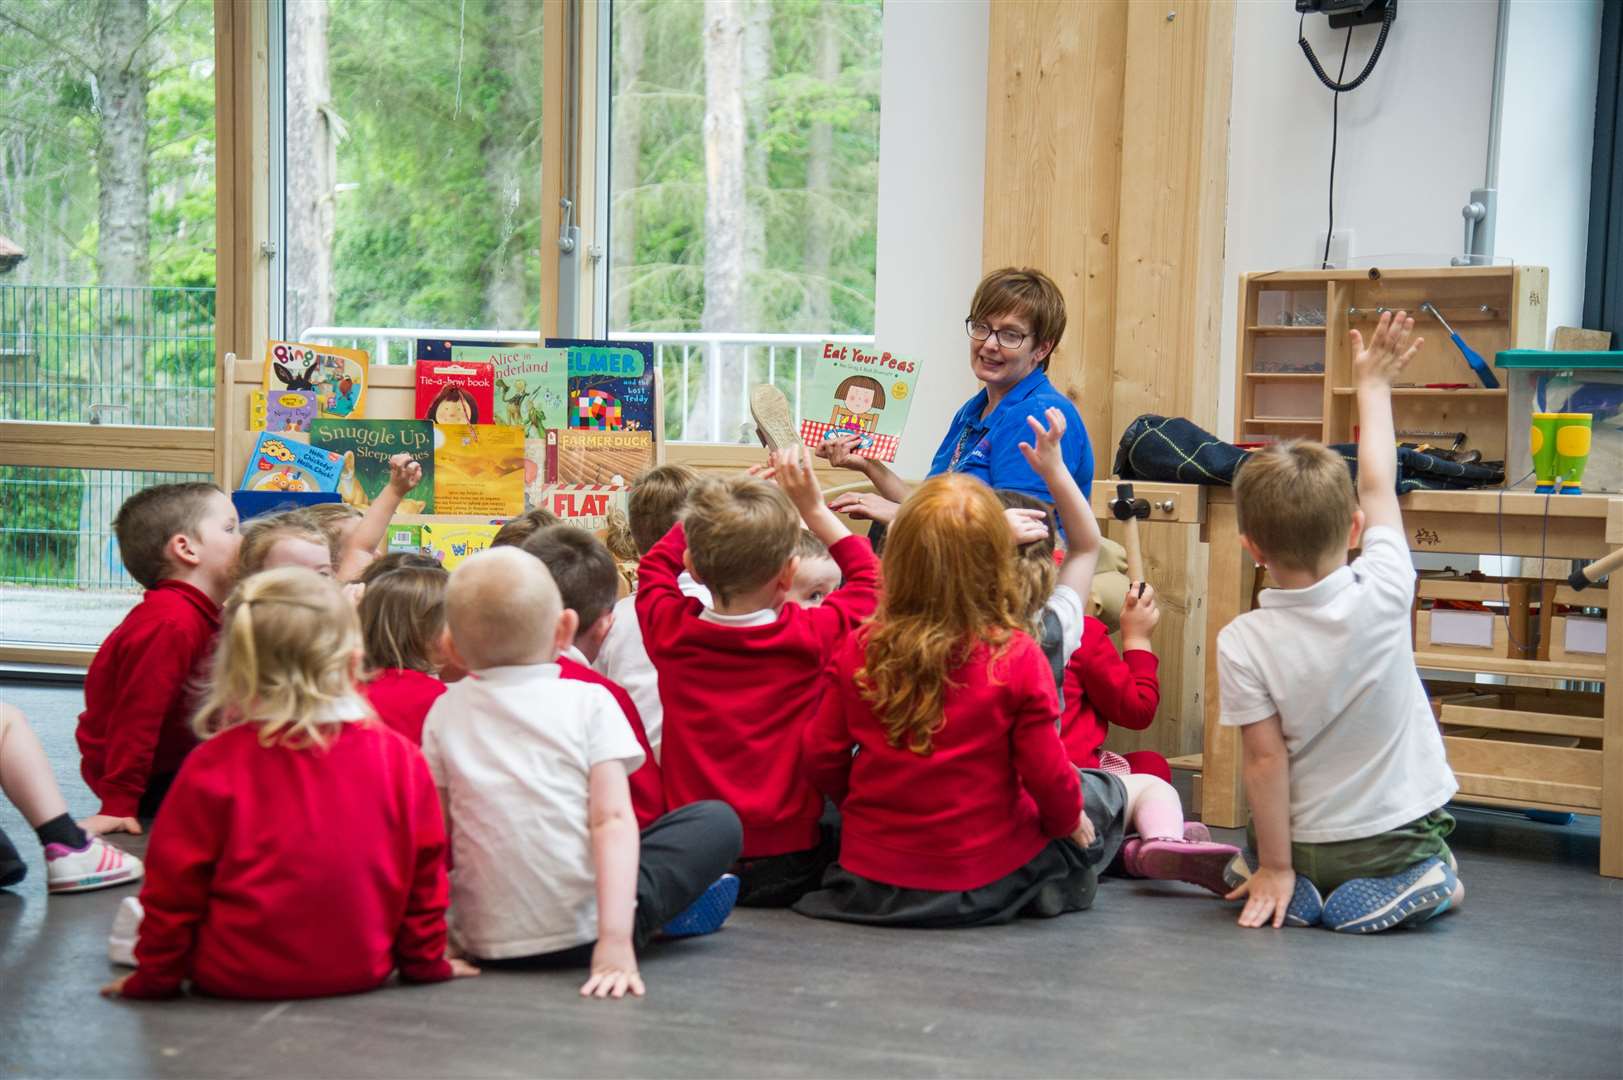 Early learning and childcare is now claimed to be at risk due cost pressures.